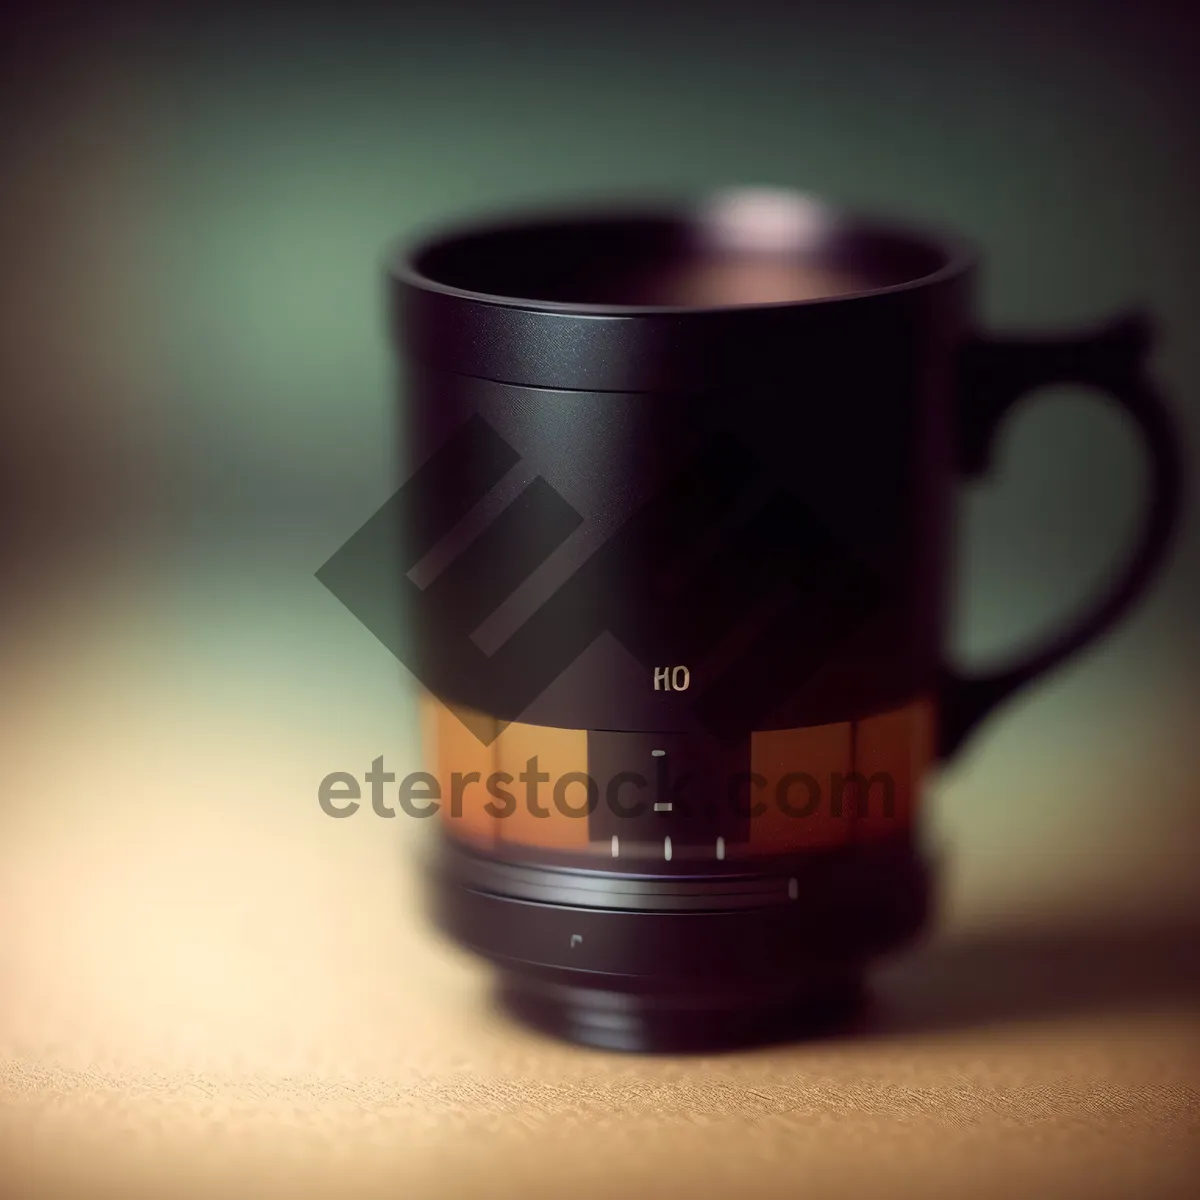 Picture of Hot Coffee Mug on Table, Morning Aroma